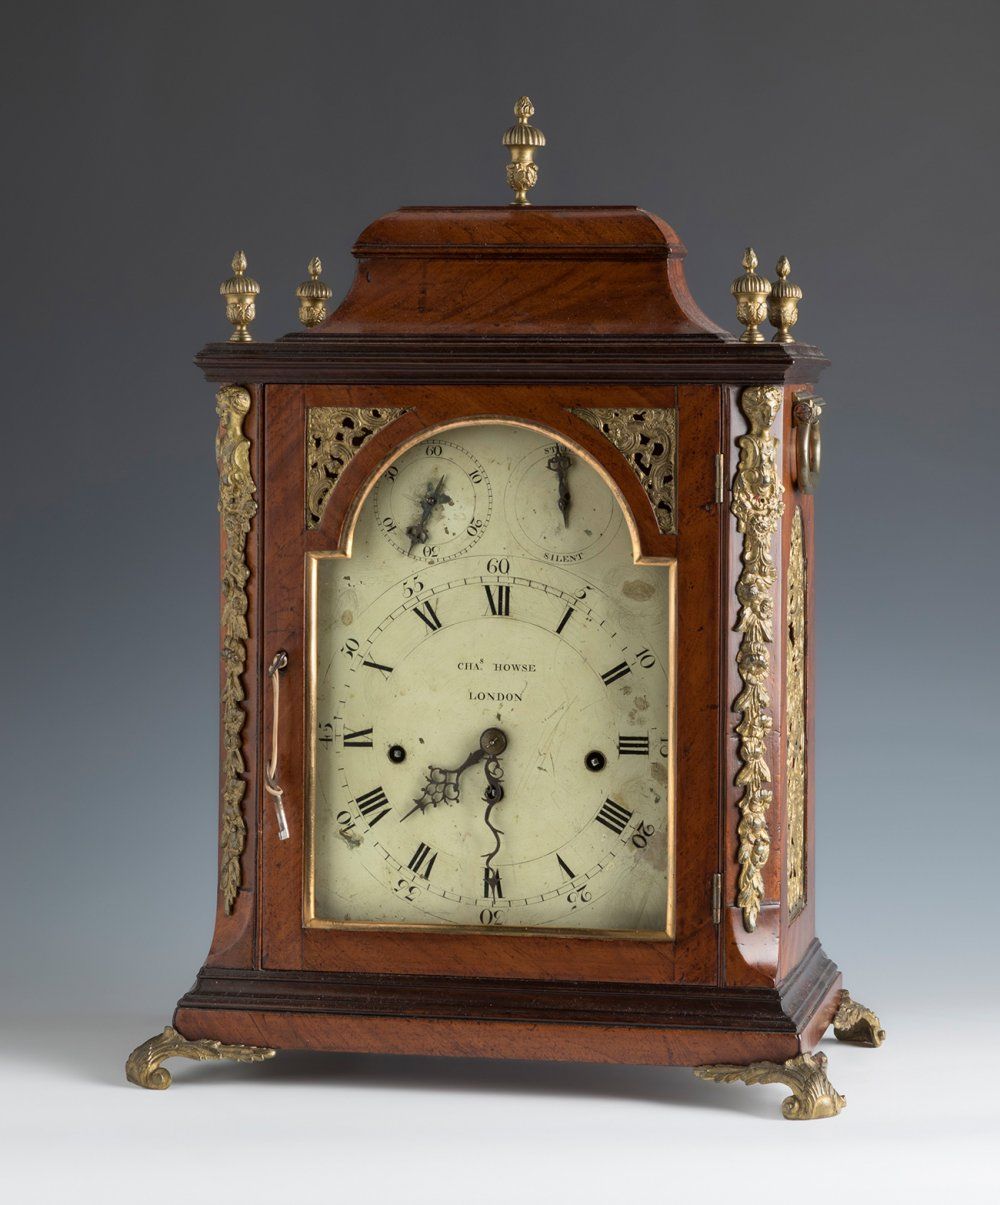 Null CHA HOWSE Bracket Clock. London, 18th century.
Mahogany wood and chiselled &hellip;